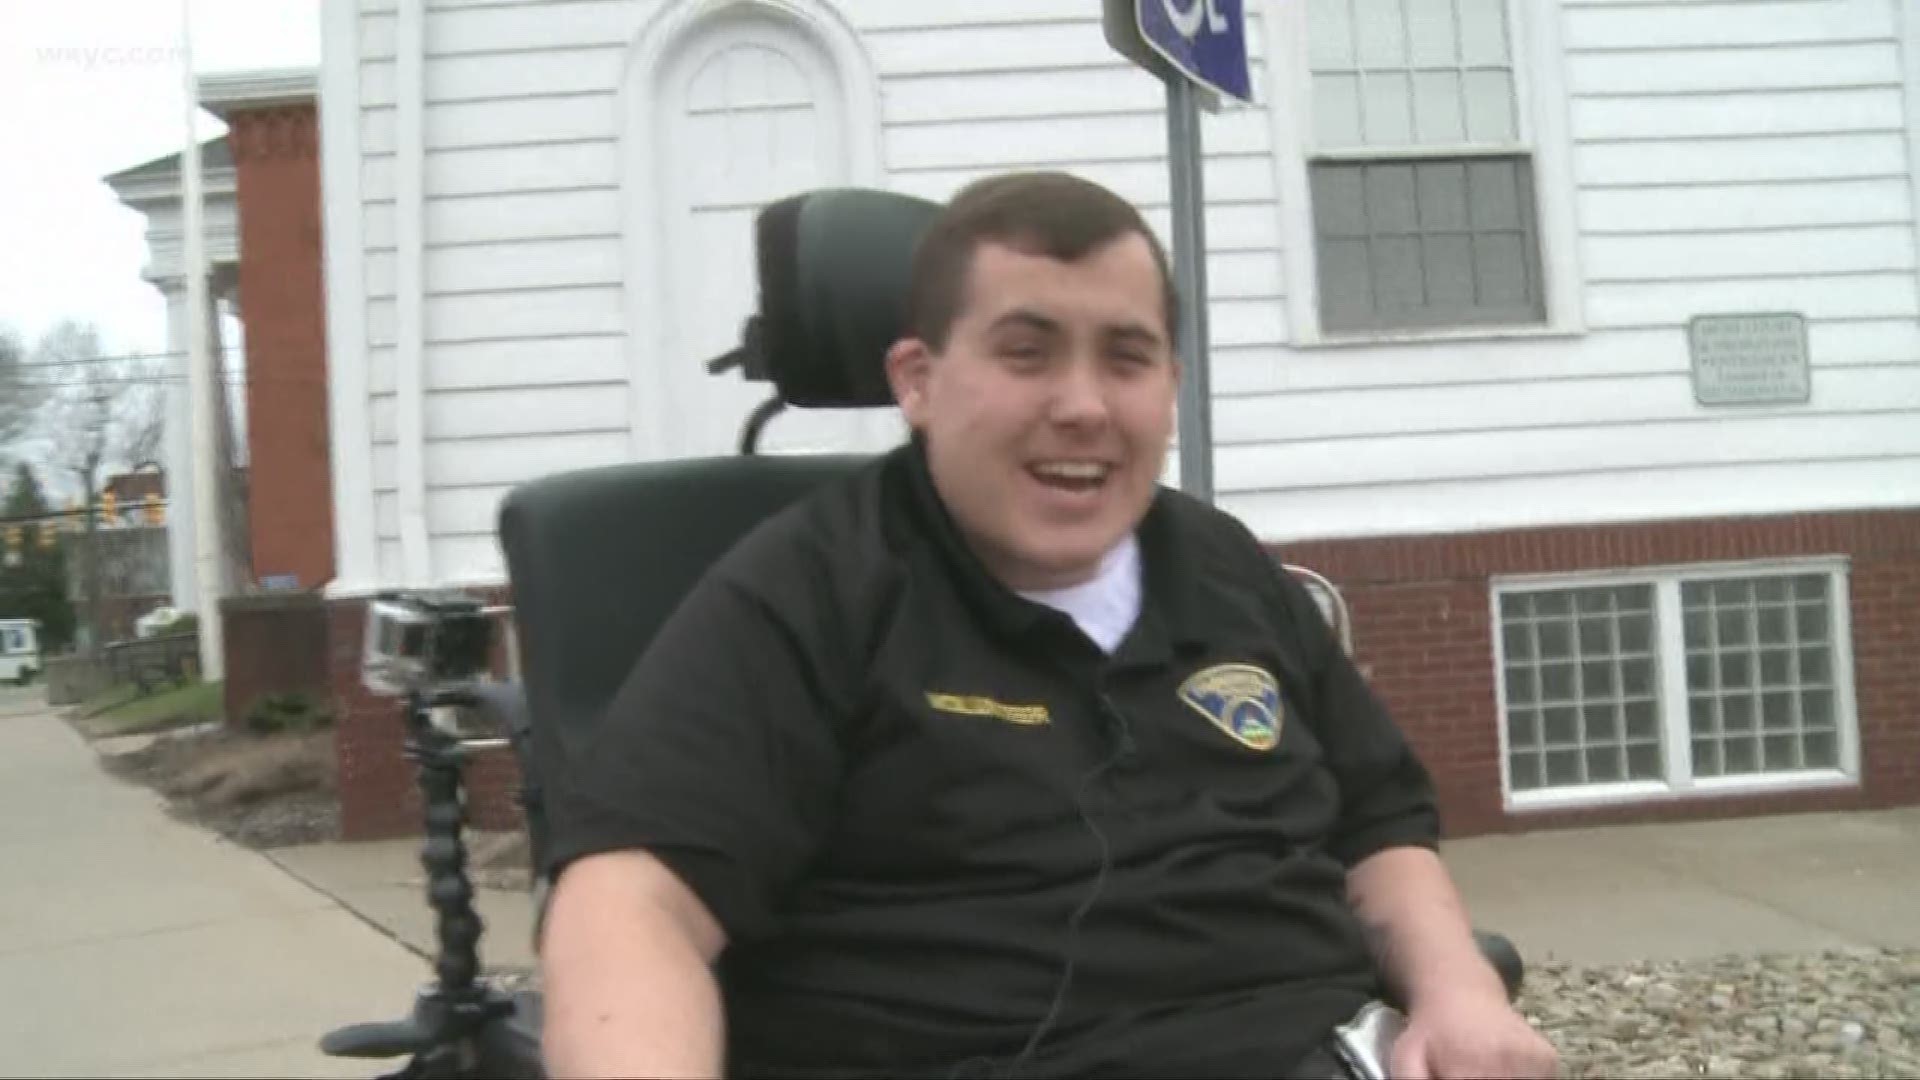 April 12, 2019: When Brandon Carlisle lost his ability to walk he never lost his dream to be an officer. See how he is giving back and providing inspiration to the Painesville Police Department.